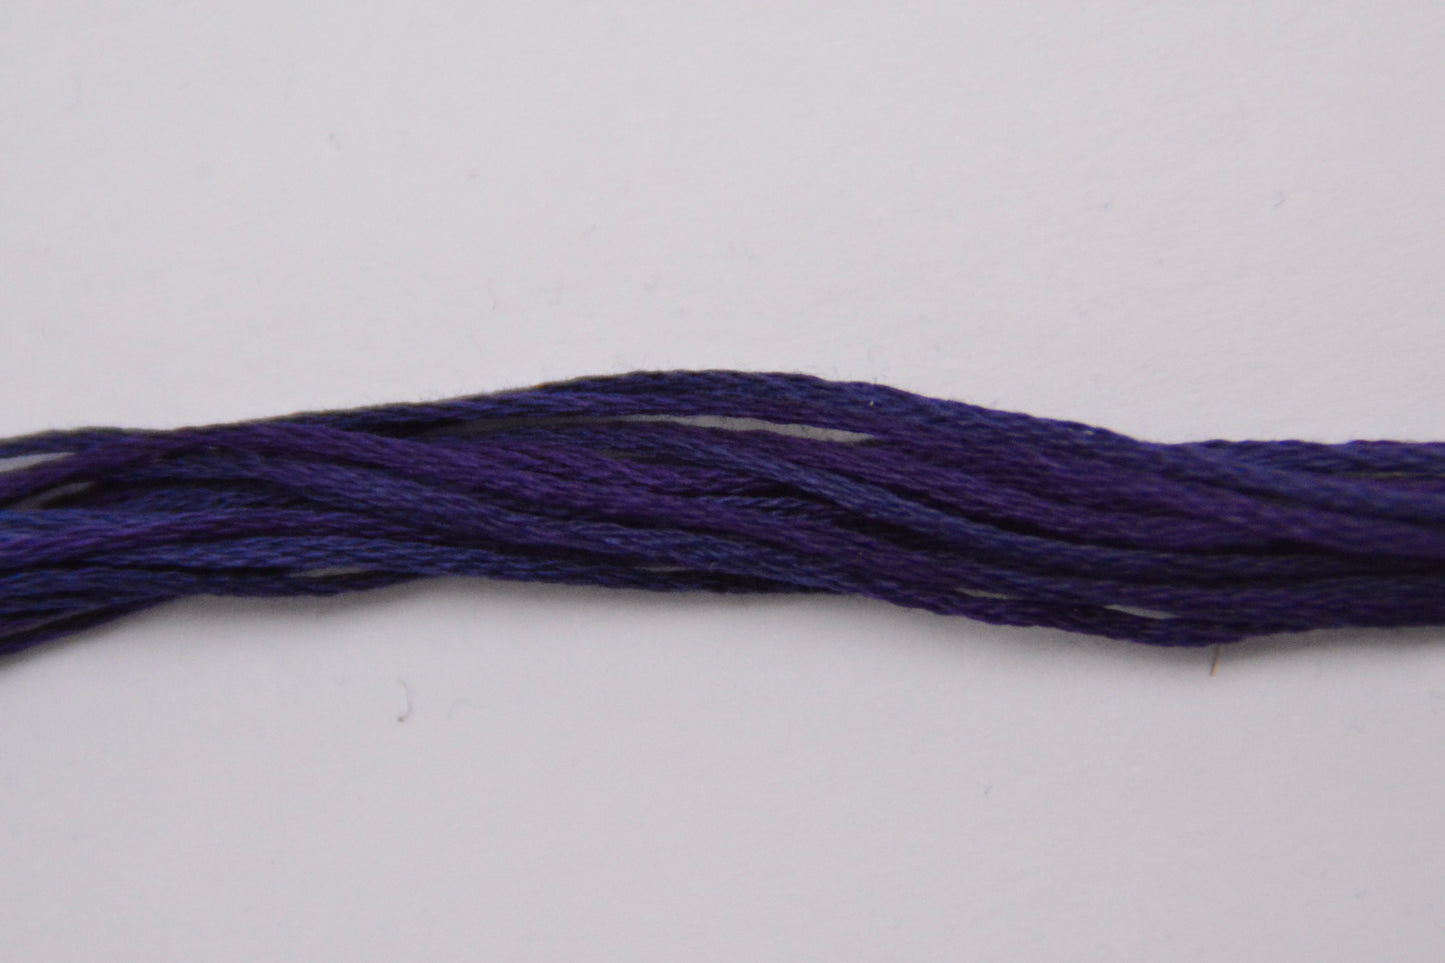 Merlin 1305 Weeks Dye Works 6-Strand Hand-Dyed Embroidery Floss